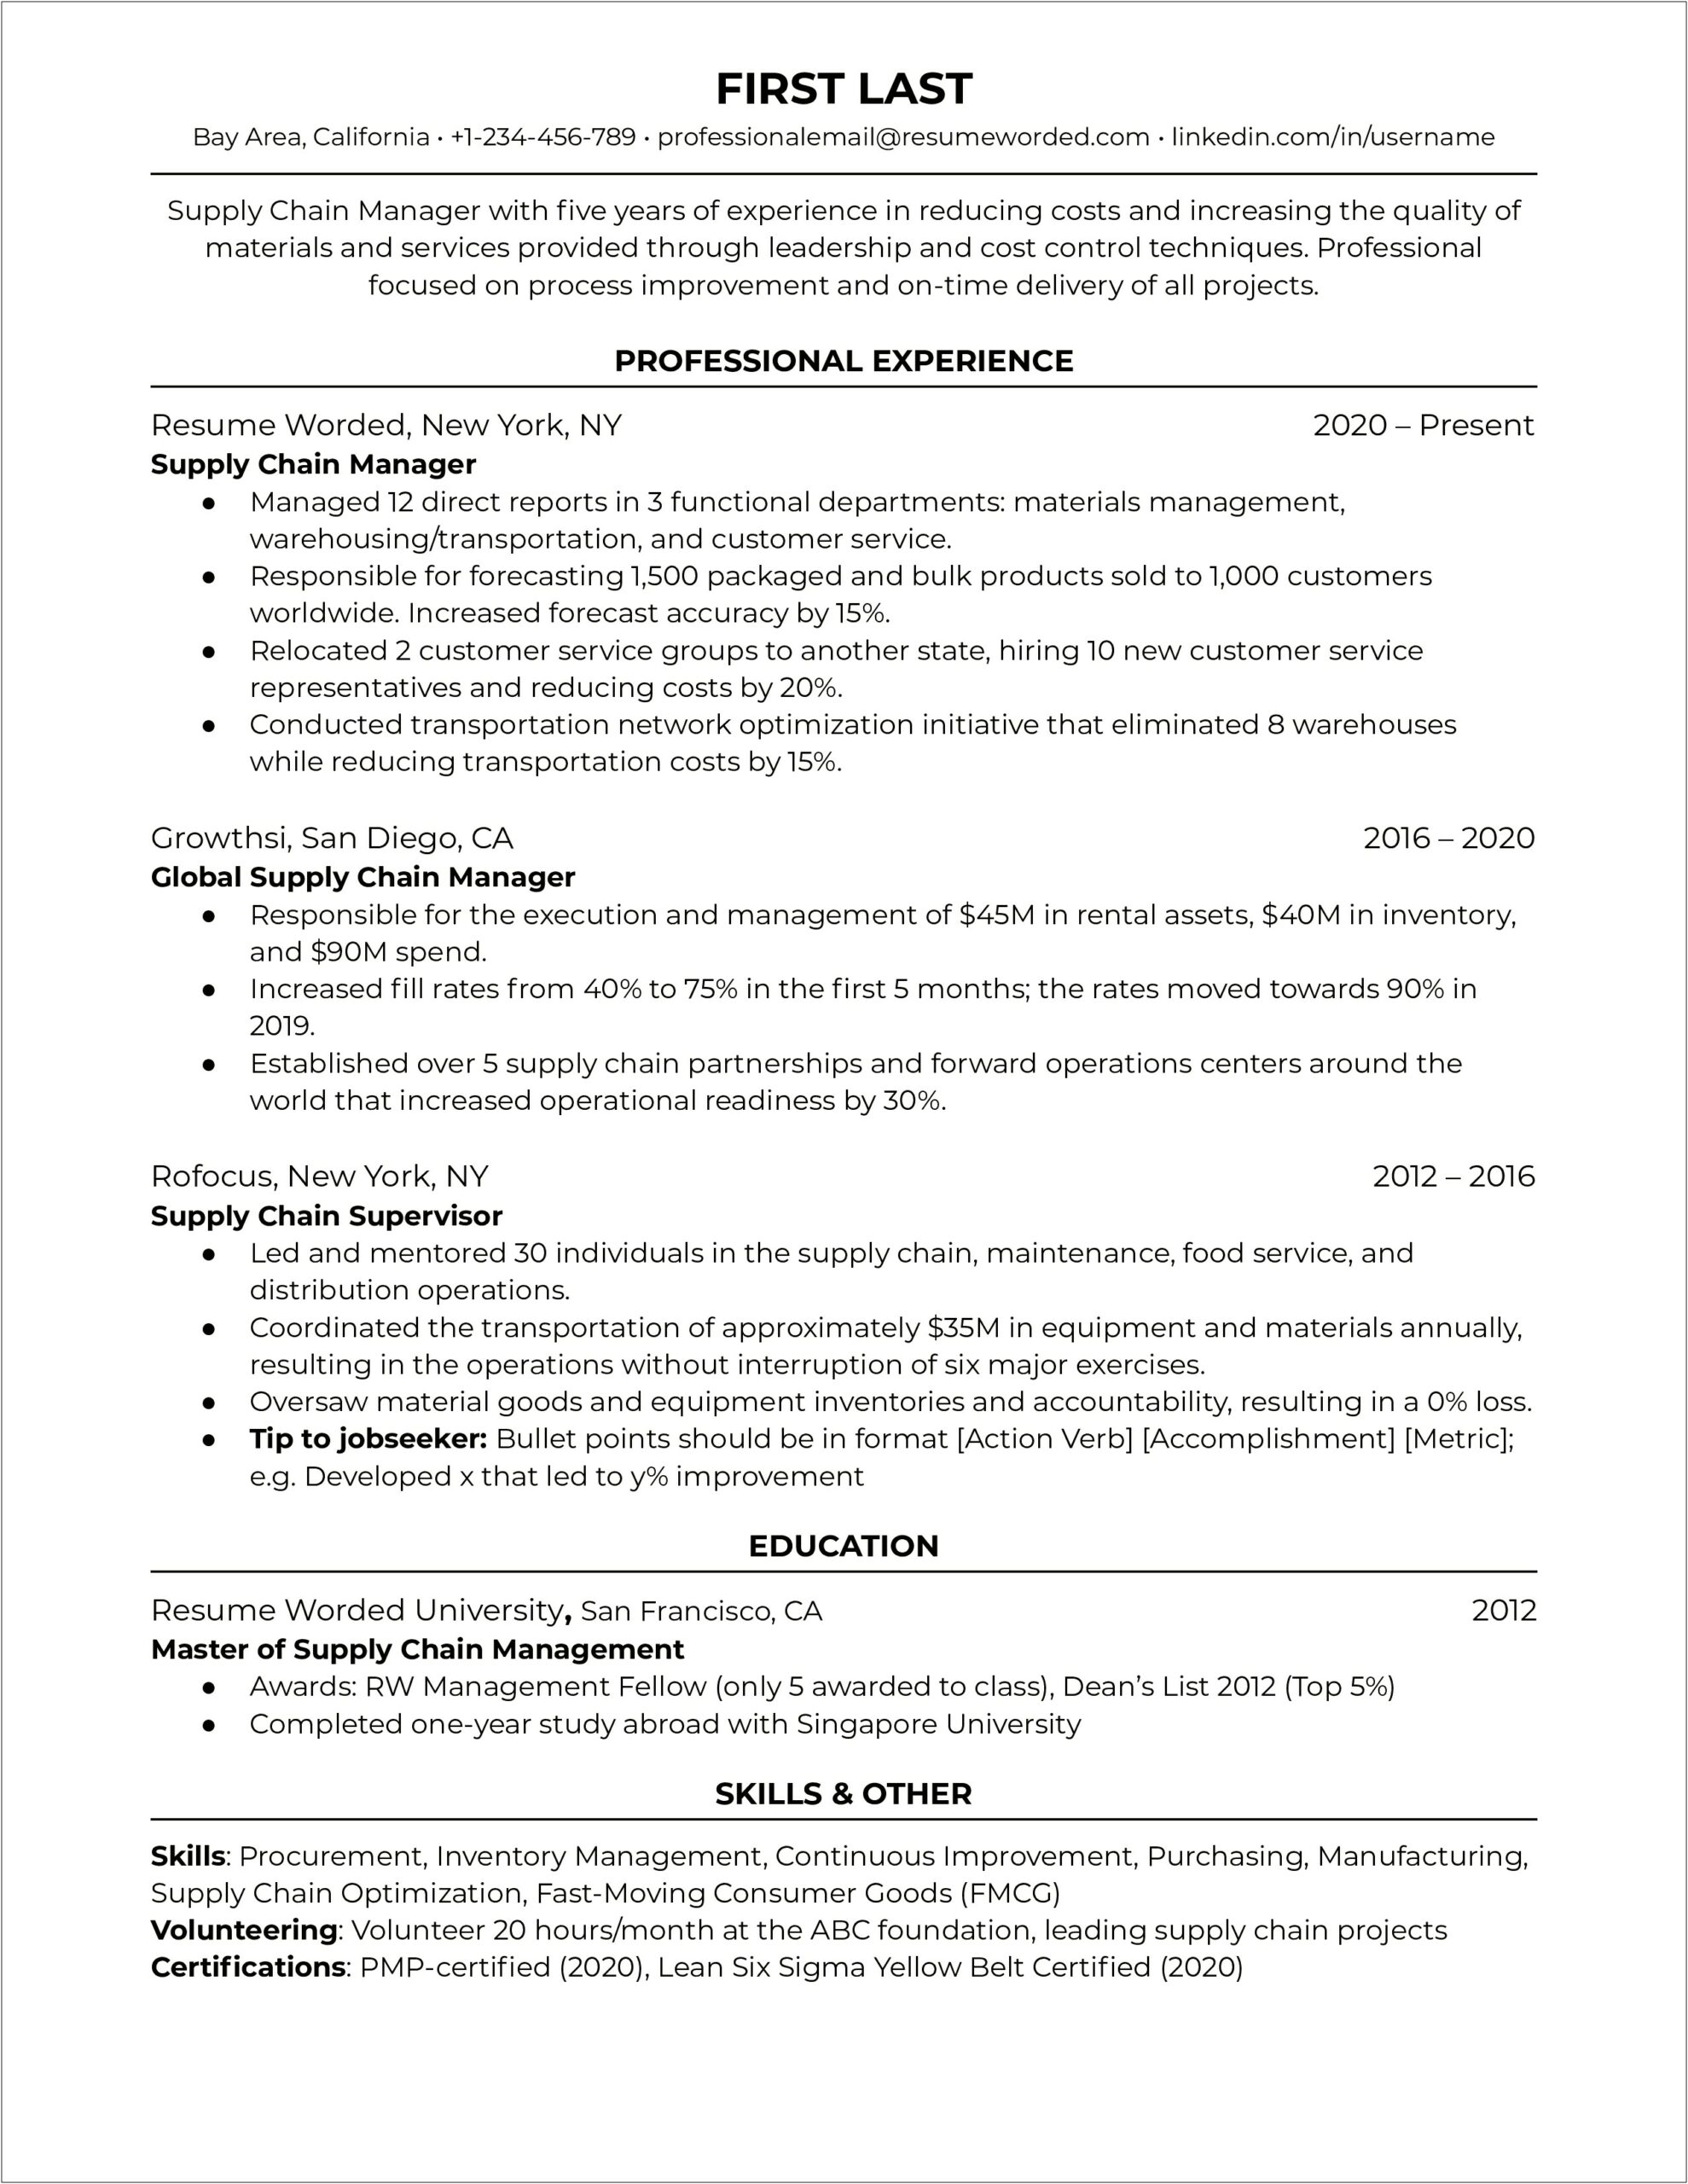 Supply Chain Management Professional Resume